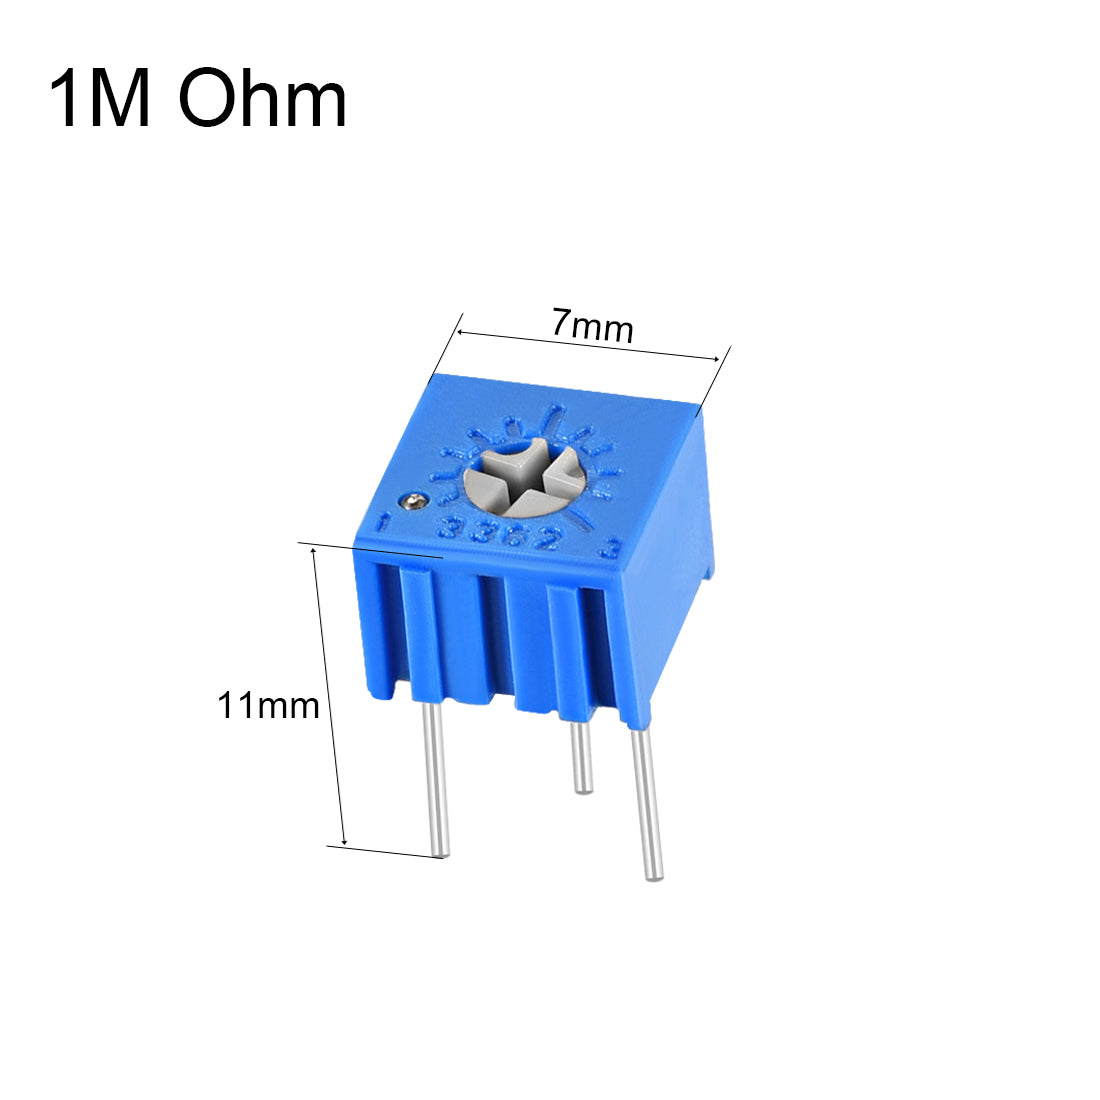 uxcell Uxcell 3362 Trimmer Potentiometer 1M Ohm Top Adjustment Horizontal Variable Resistors 5Pcs